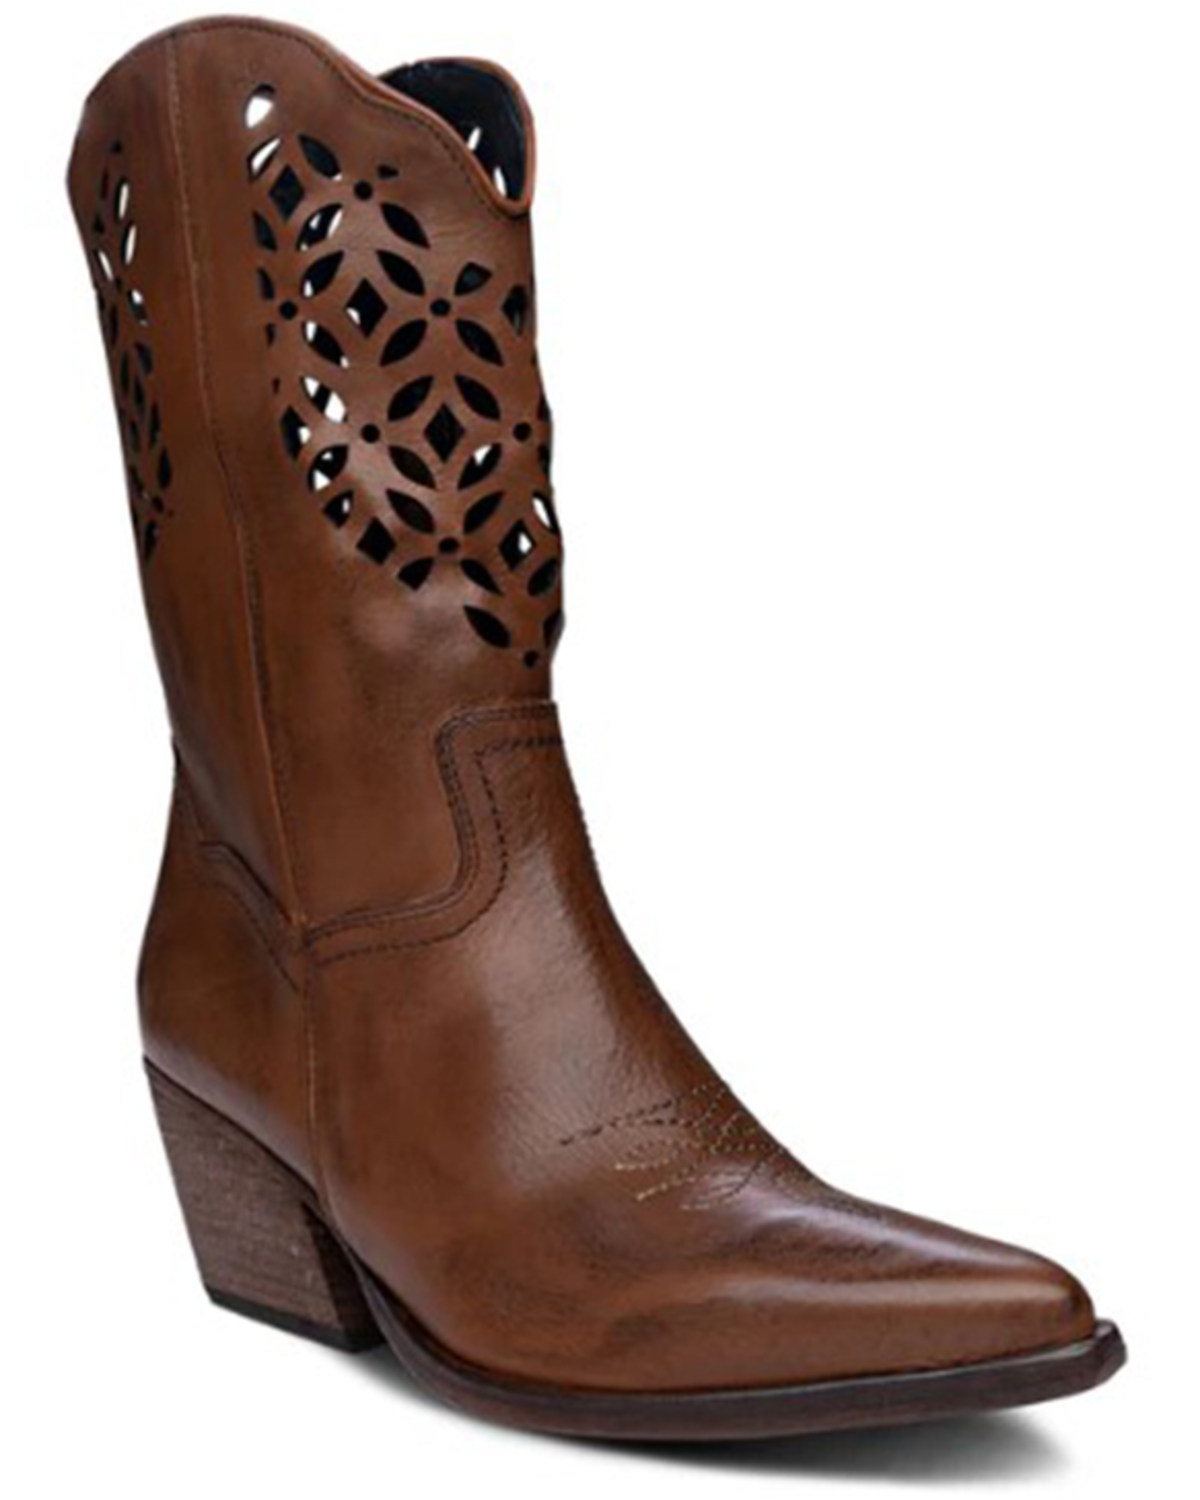 Golo Shoes Women's Yosemite Western Boots - Pointed Toe